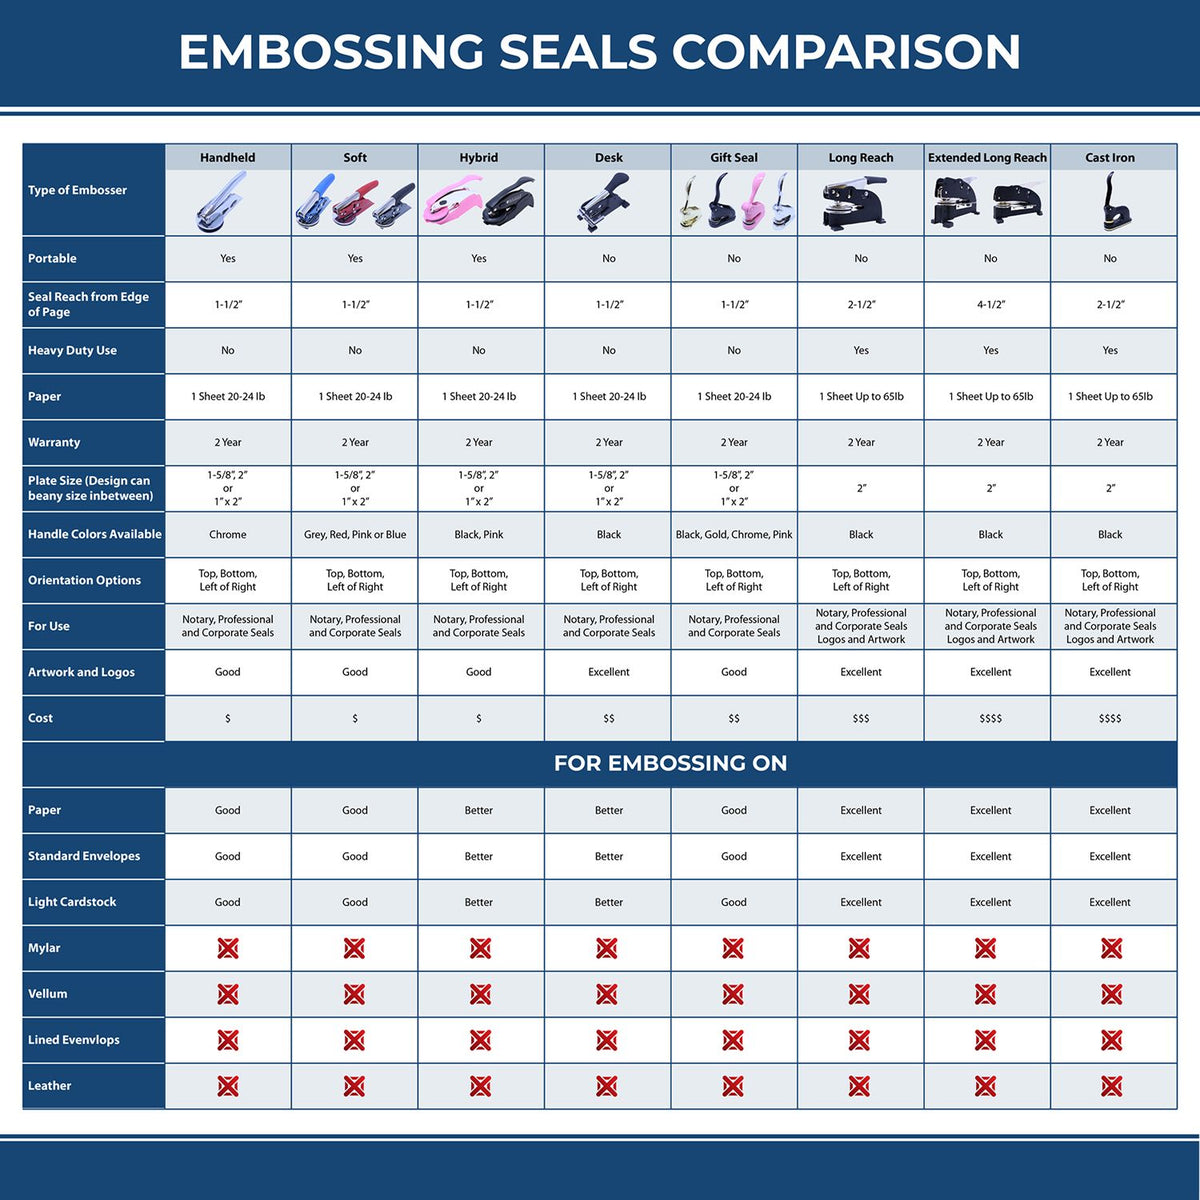 A comparison chart for the different types of mount models available for the Soft Pocket Minnesota Landscape Architect Embosser.